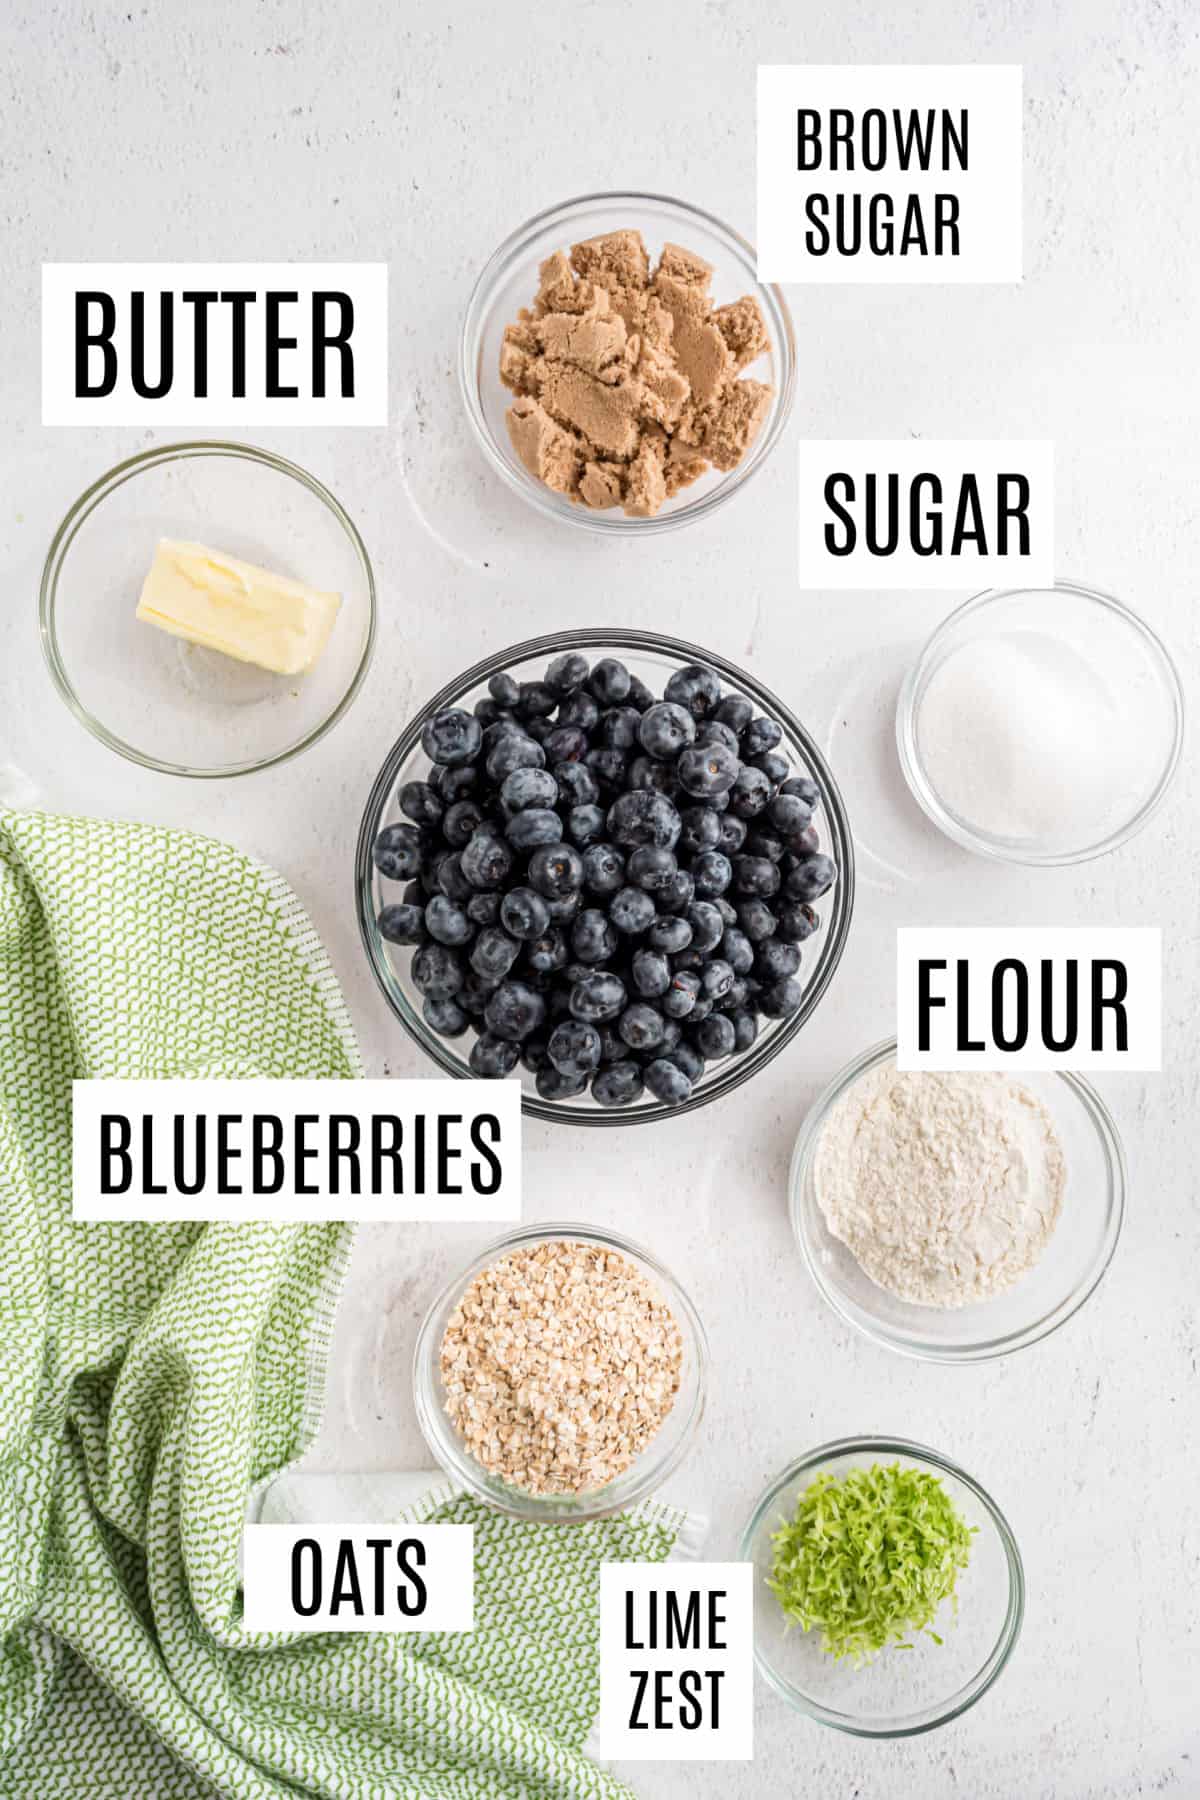 Ingredients needed to make blueberry lime crumble.